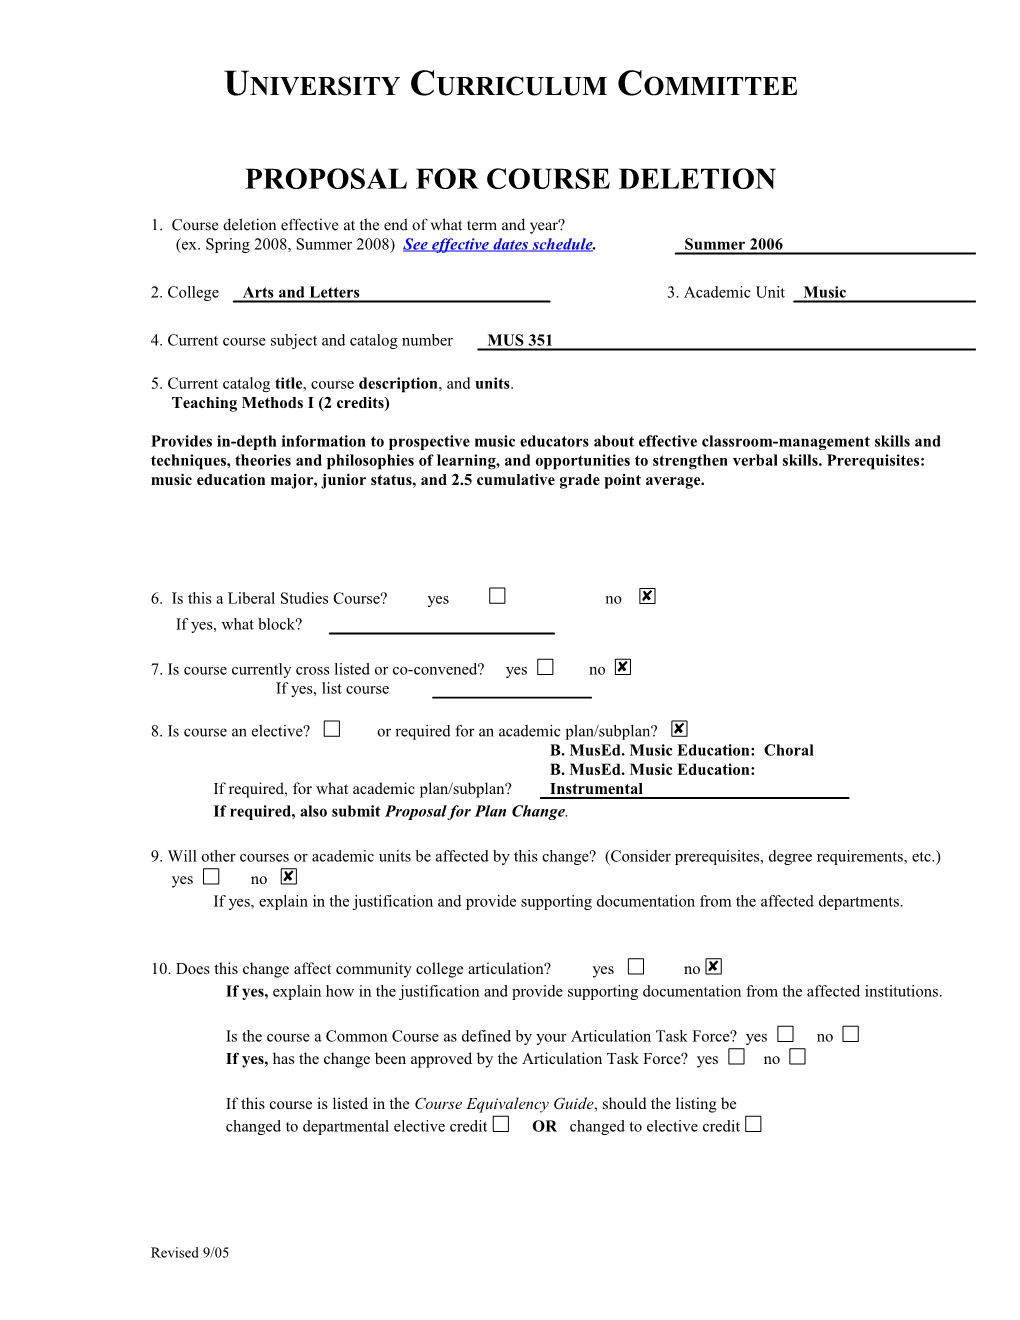 Proposal for Course Deletion